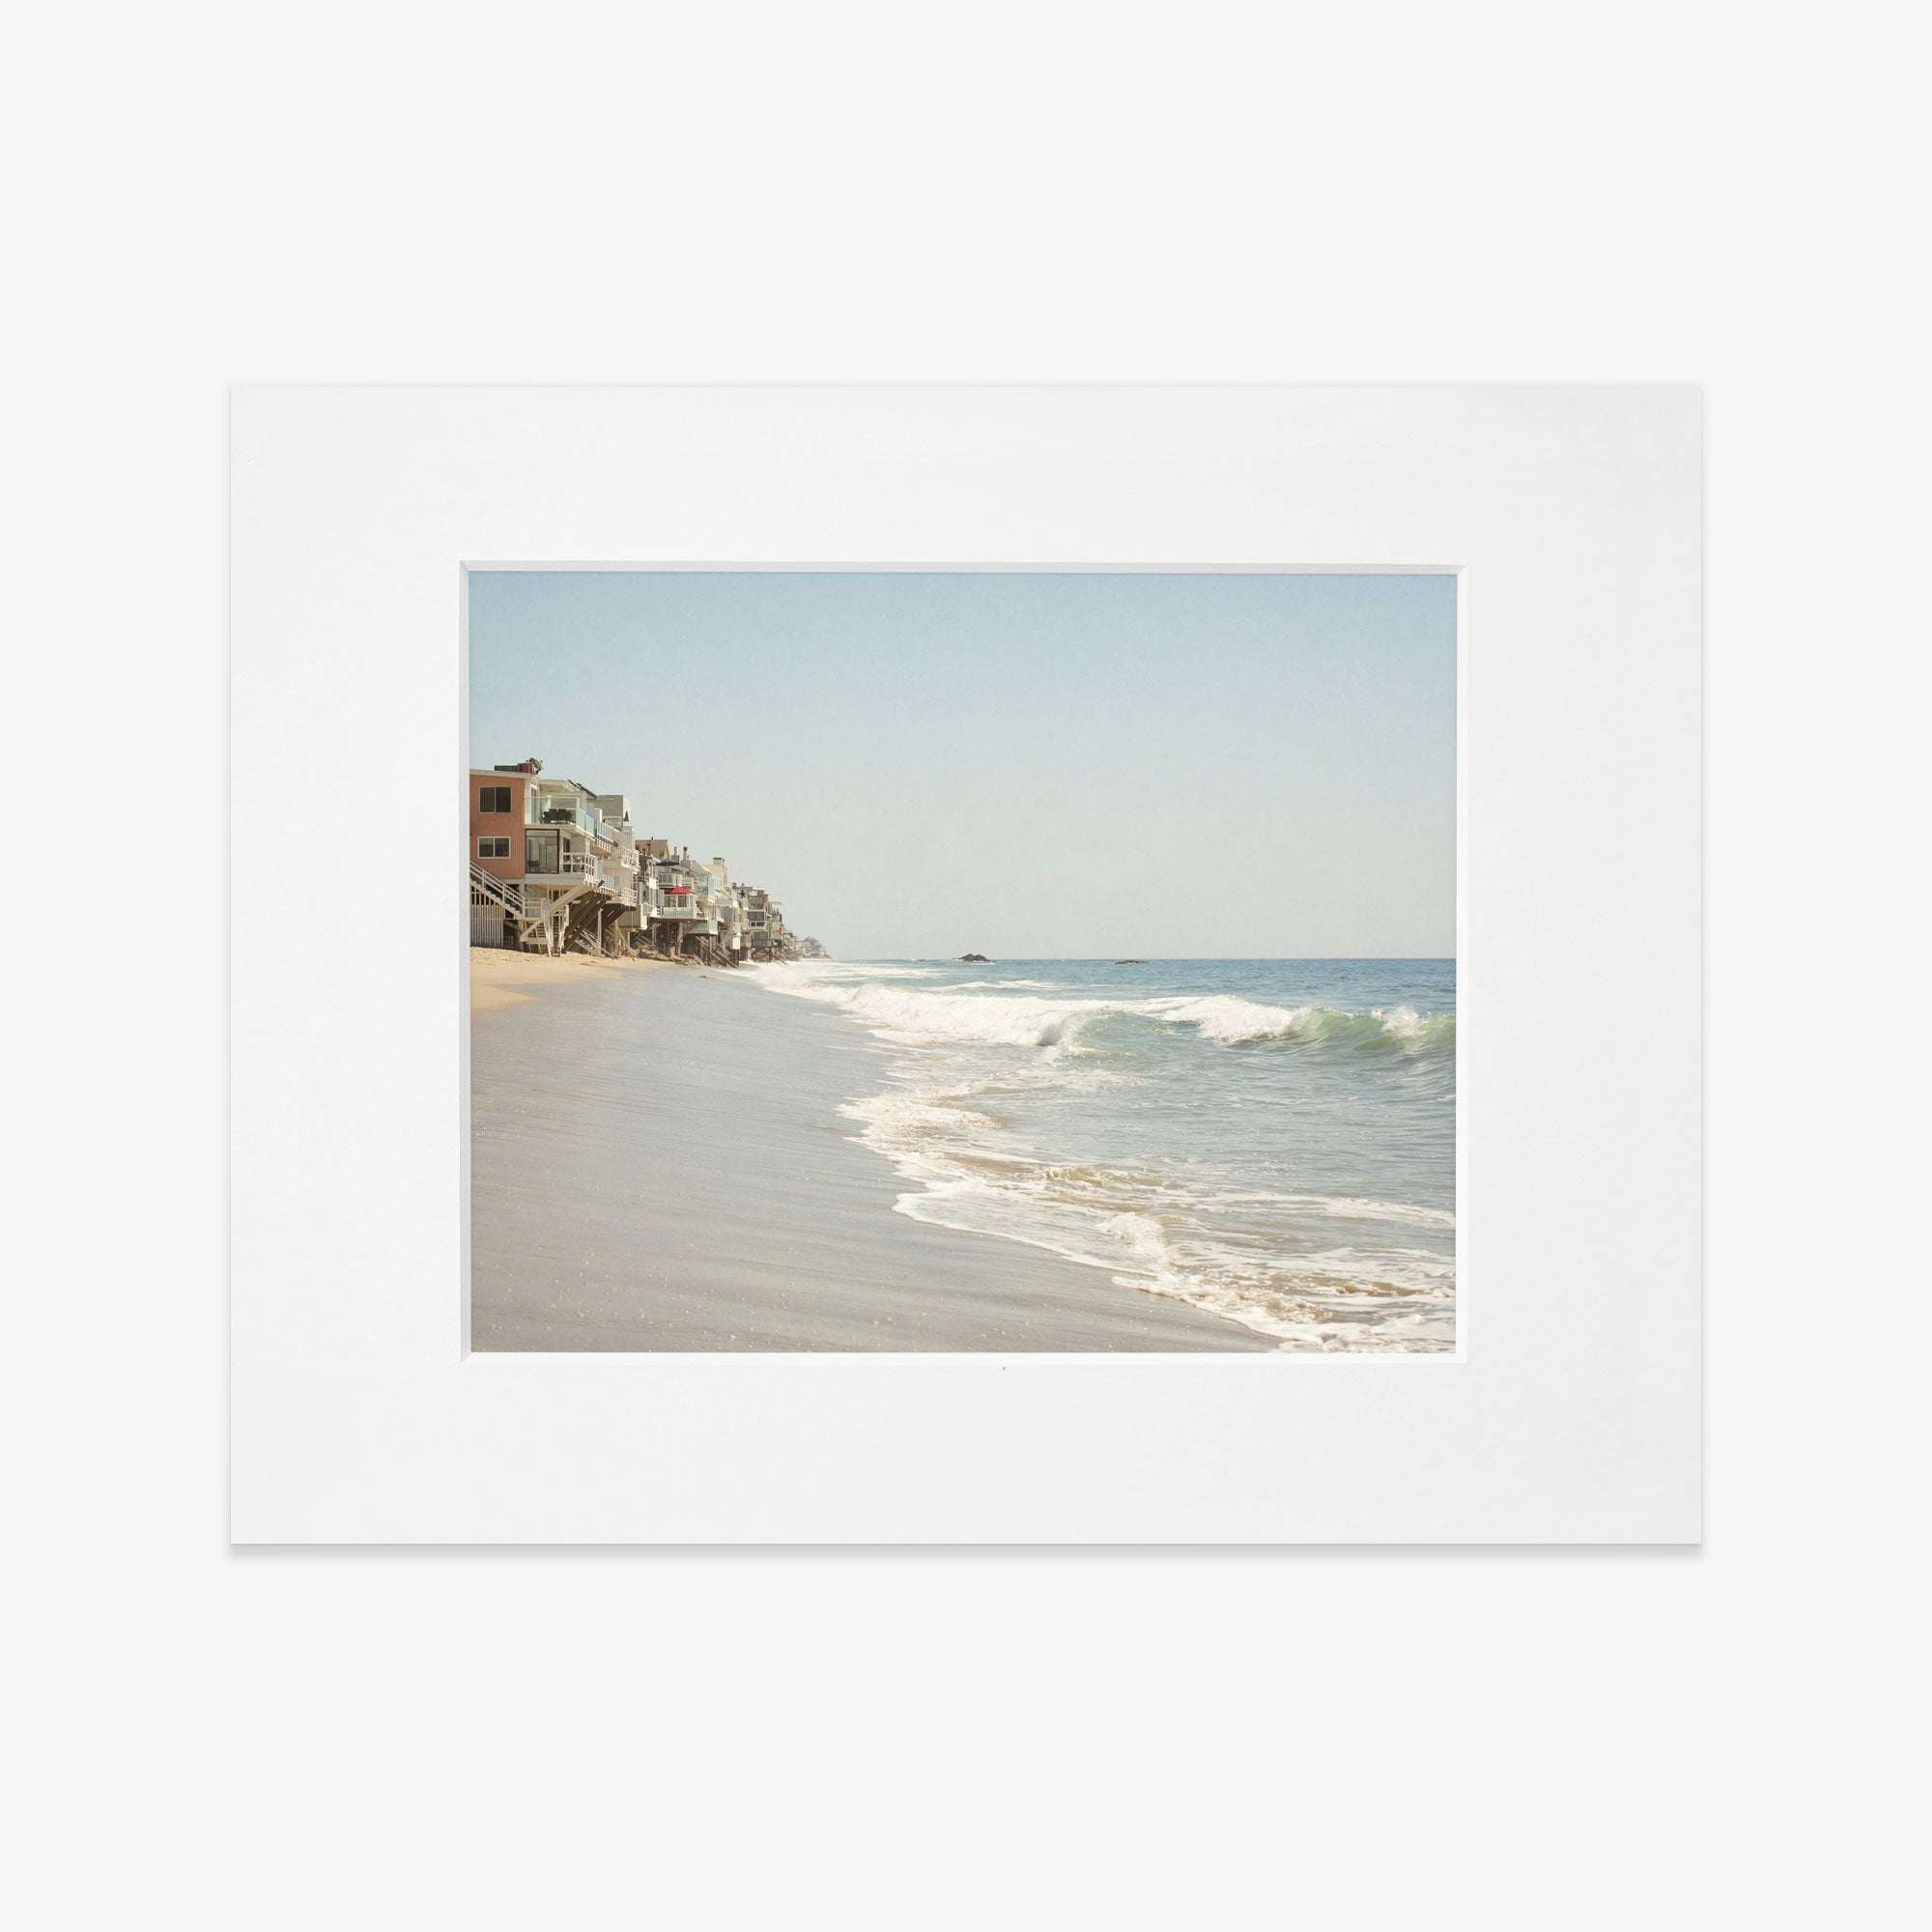 Polaroid photo showing a serene beach scene with gentle waves, a sandy shore, and a row of houses extending along the Malibu coastline under a clear sky. - Offley Green&#39;s Malibu Beach House Print, &#39;Ocean View&#39;